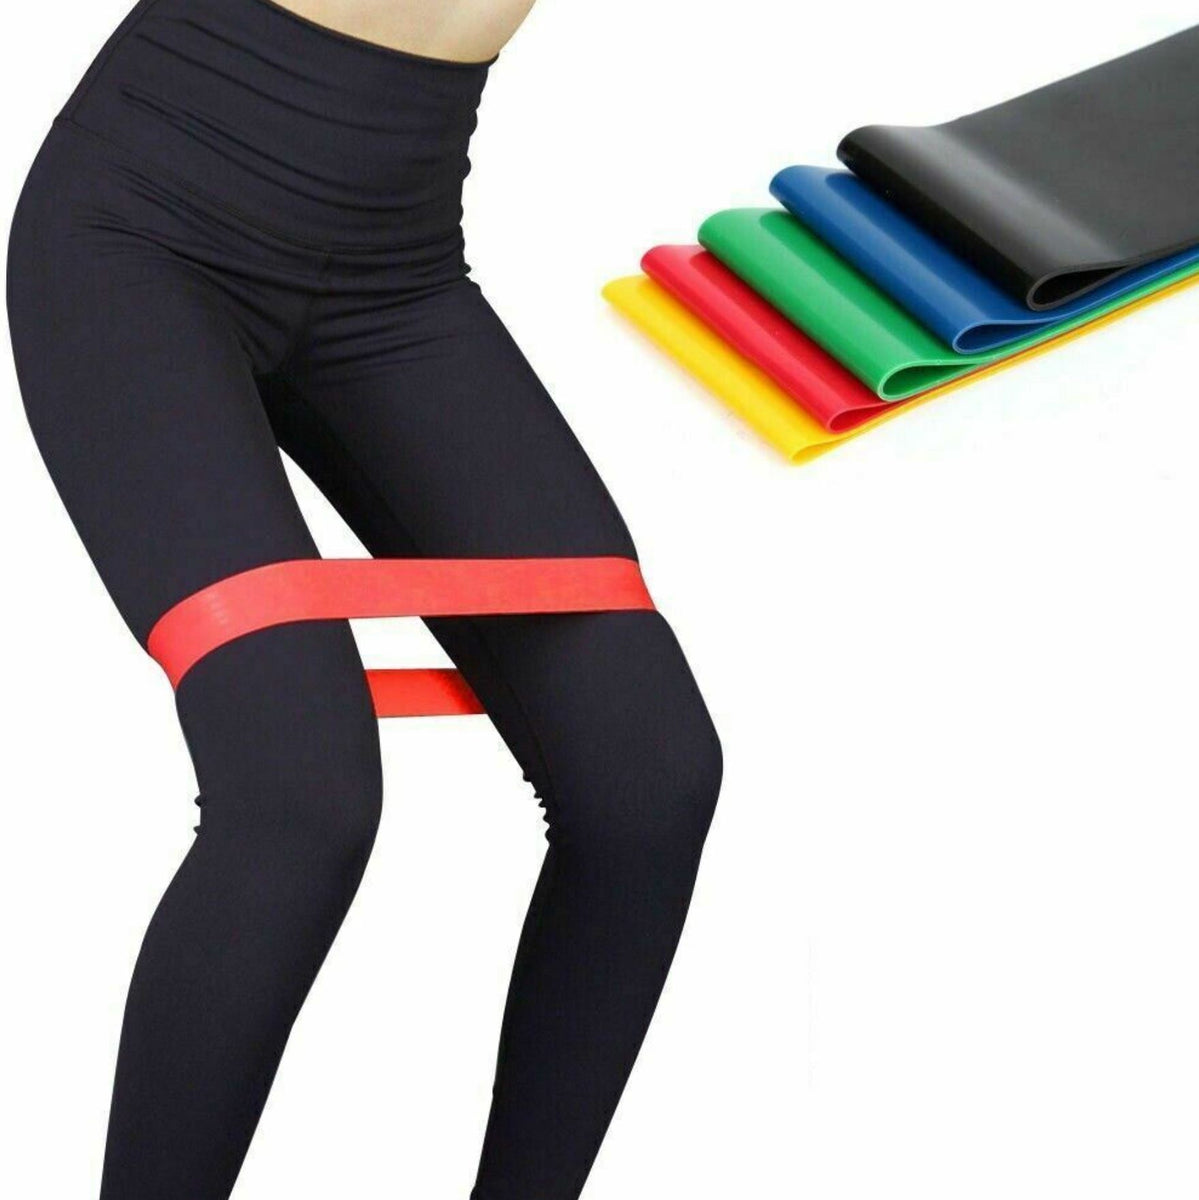 Resistance bands use it in a variety of ways